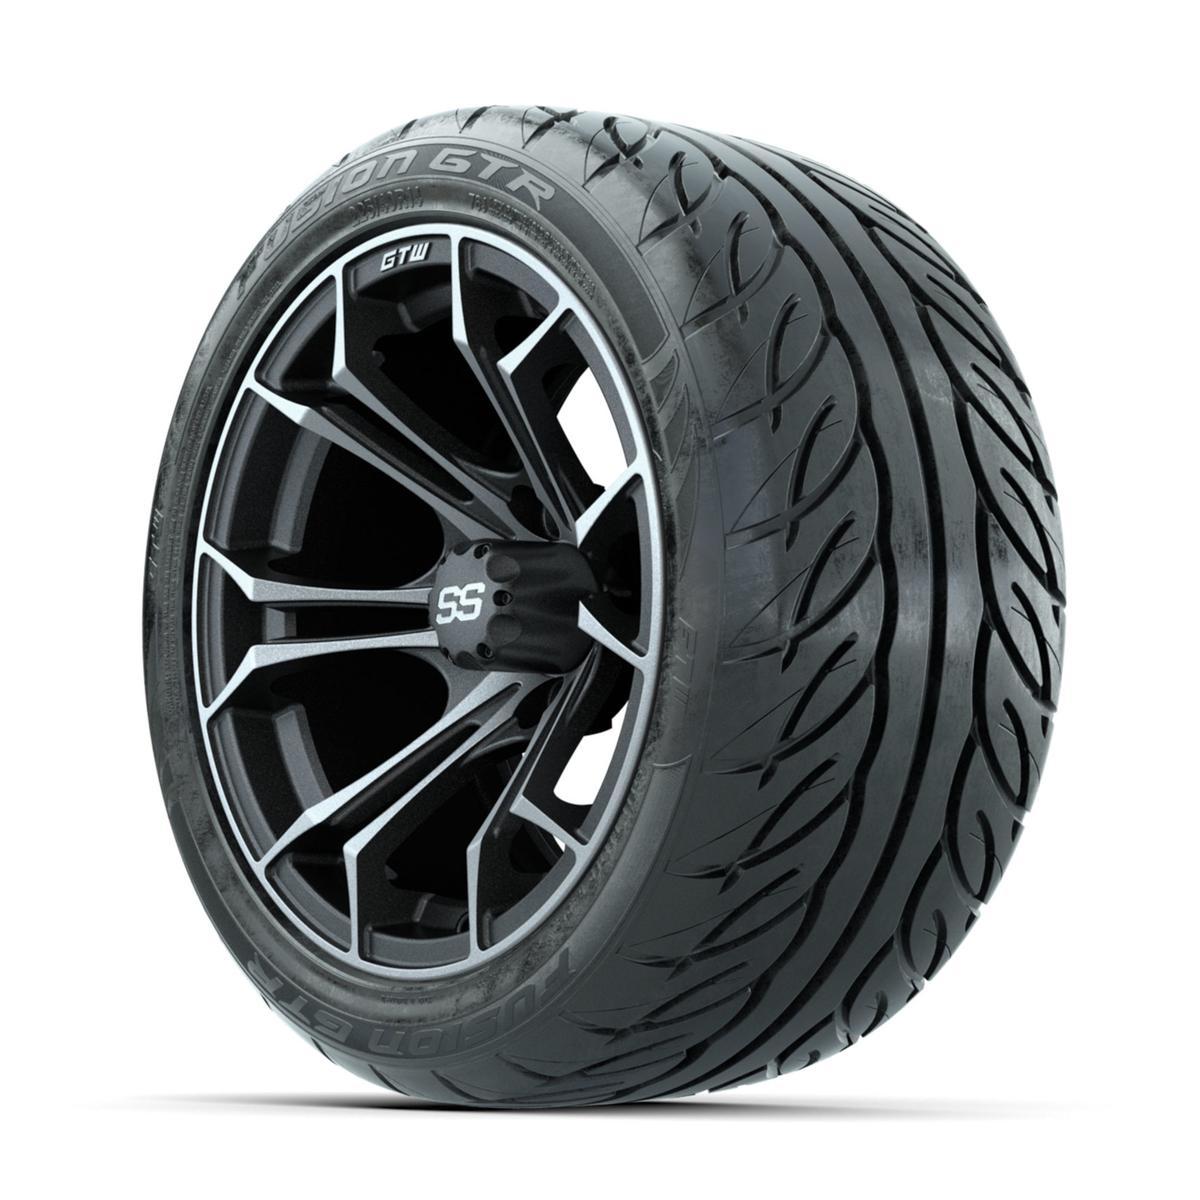 GTW Spyder Matte Grey 14 in Wheels with 225/40-R14 Fusion GTR Street Tires – Full Set